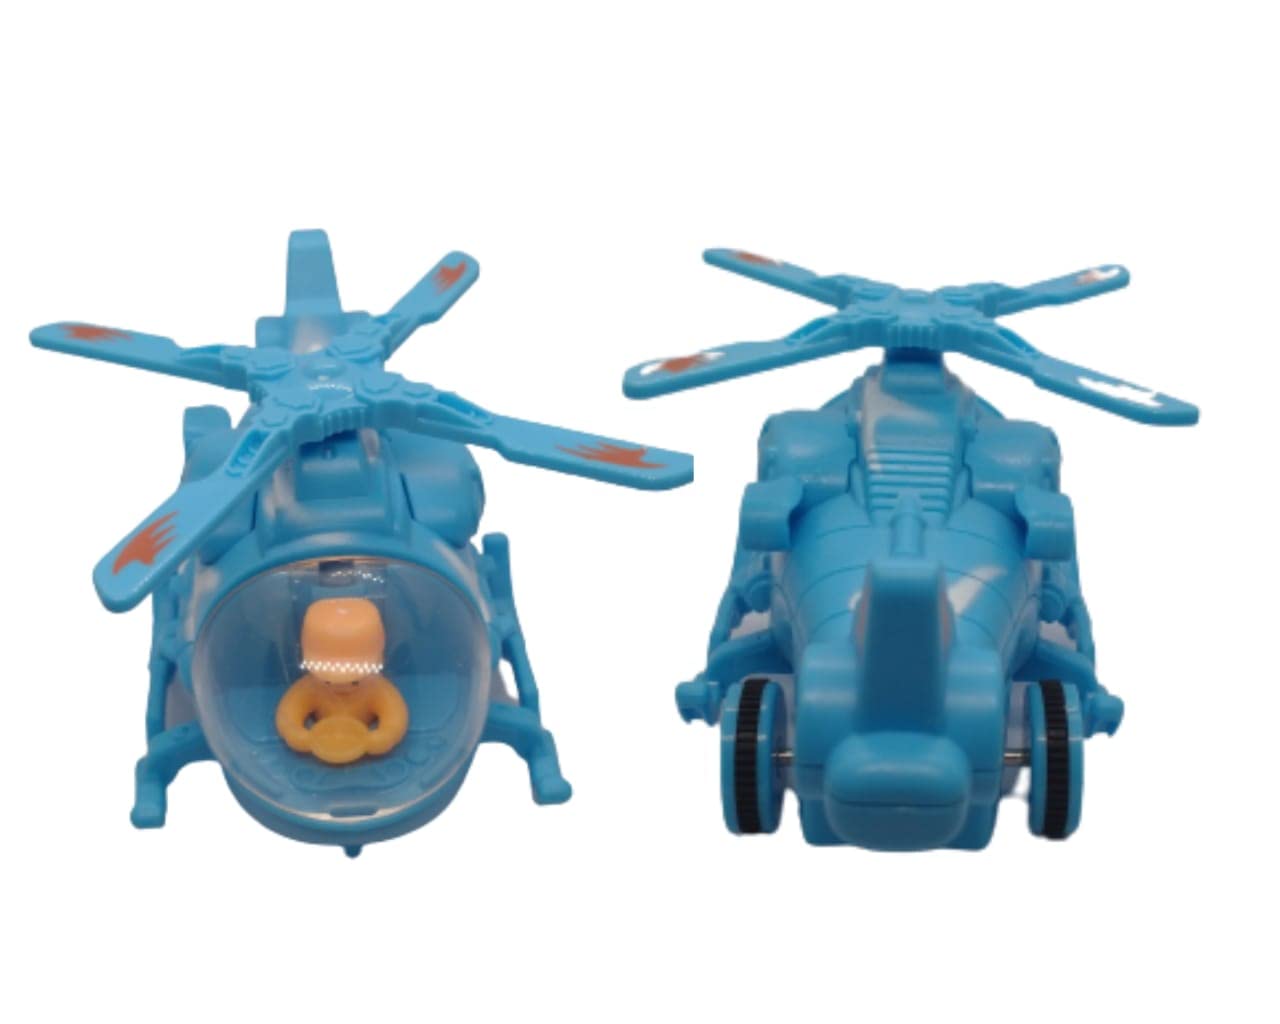 Helicopter Toy for Kids/Battle 360 Degree revolving Helicopter/Push and Go Helicopter Toy/Wind up Helicopter Toy for Boys and Girls Multicolor